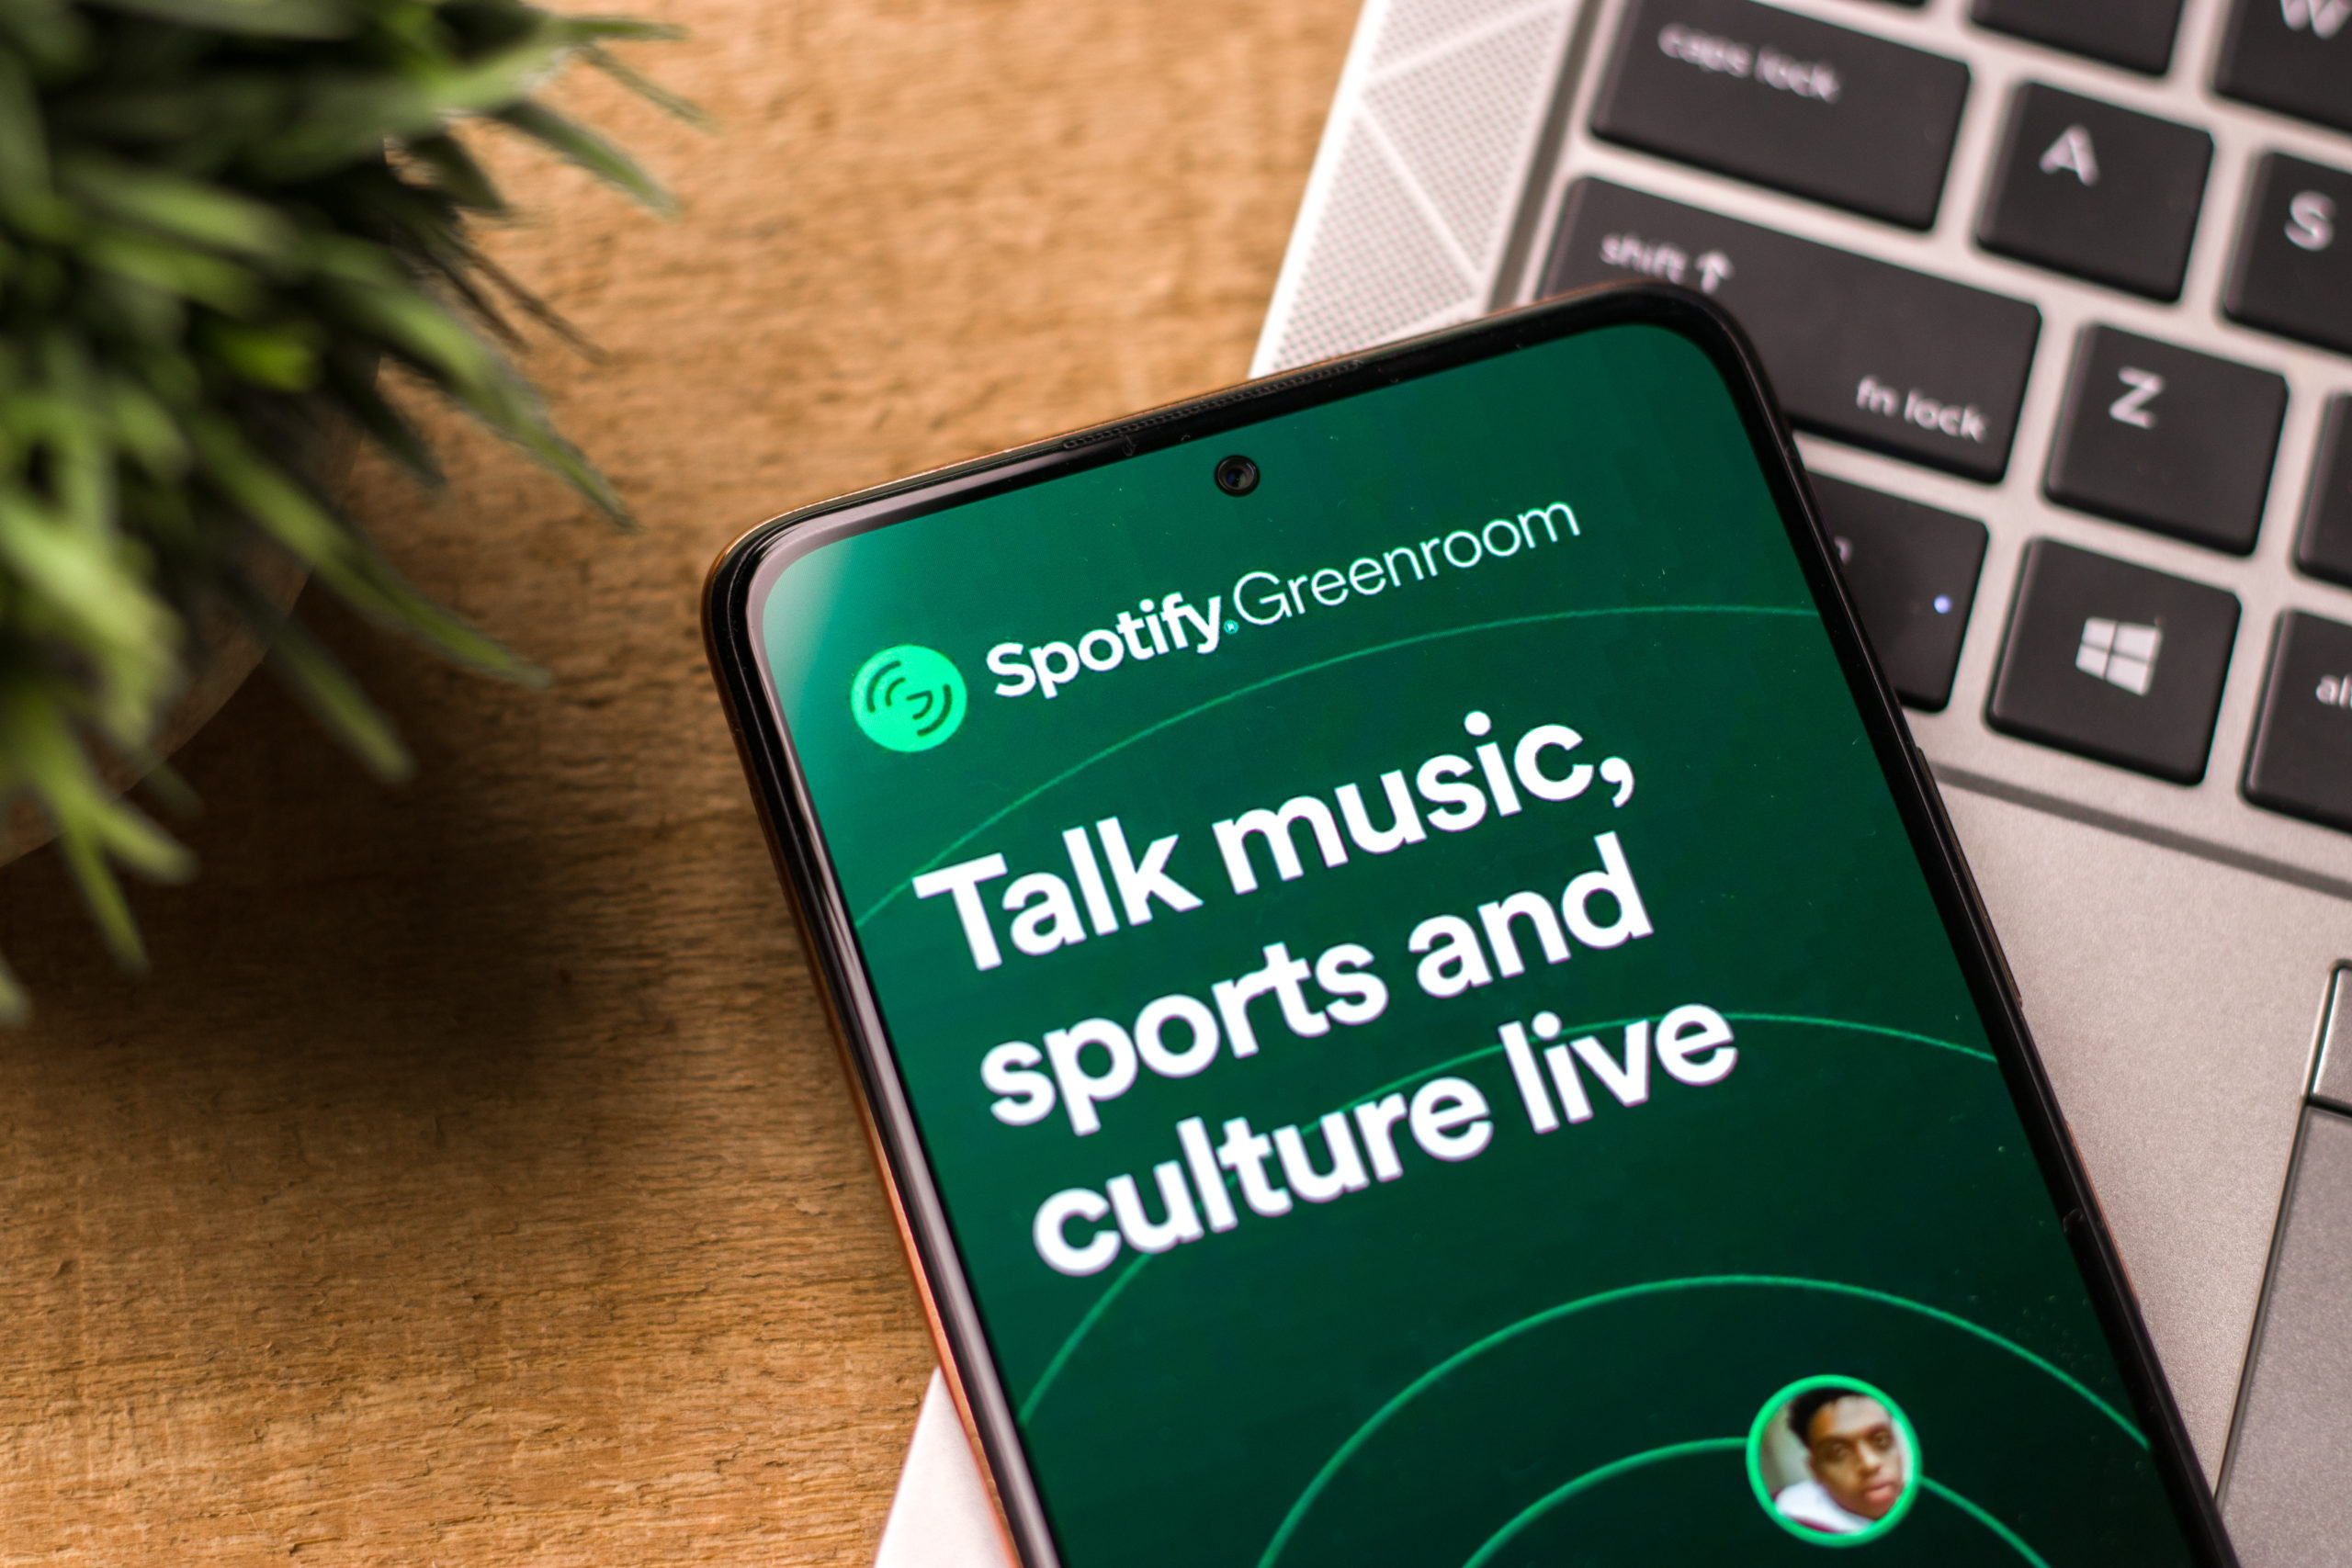 Spotify Greenroom and Clubhouse audio chat apps are popular in 2022